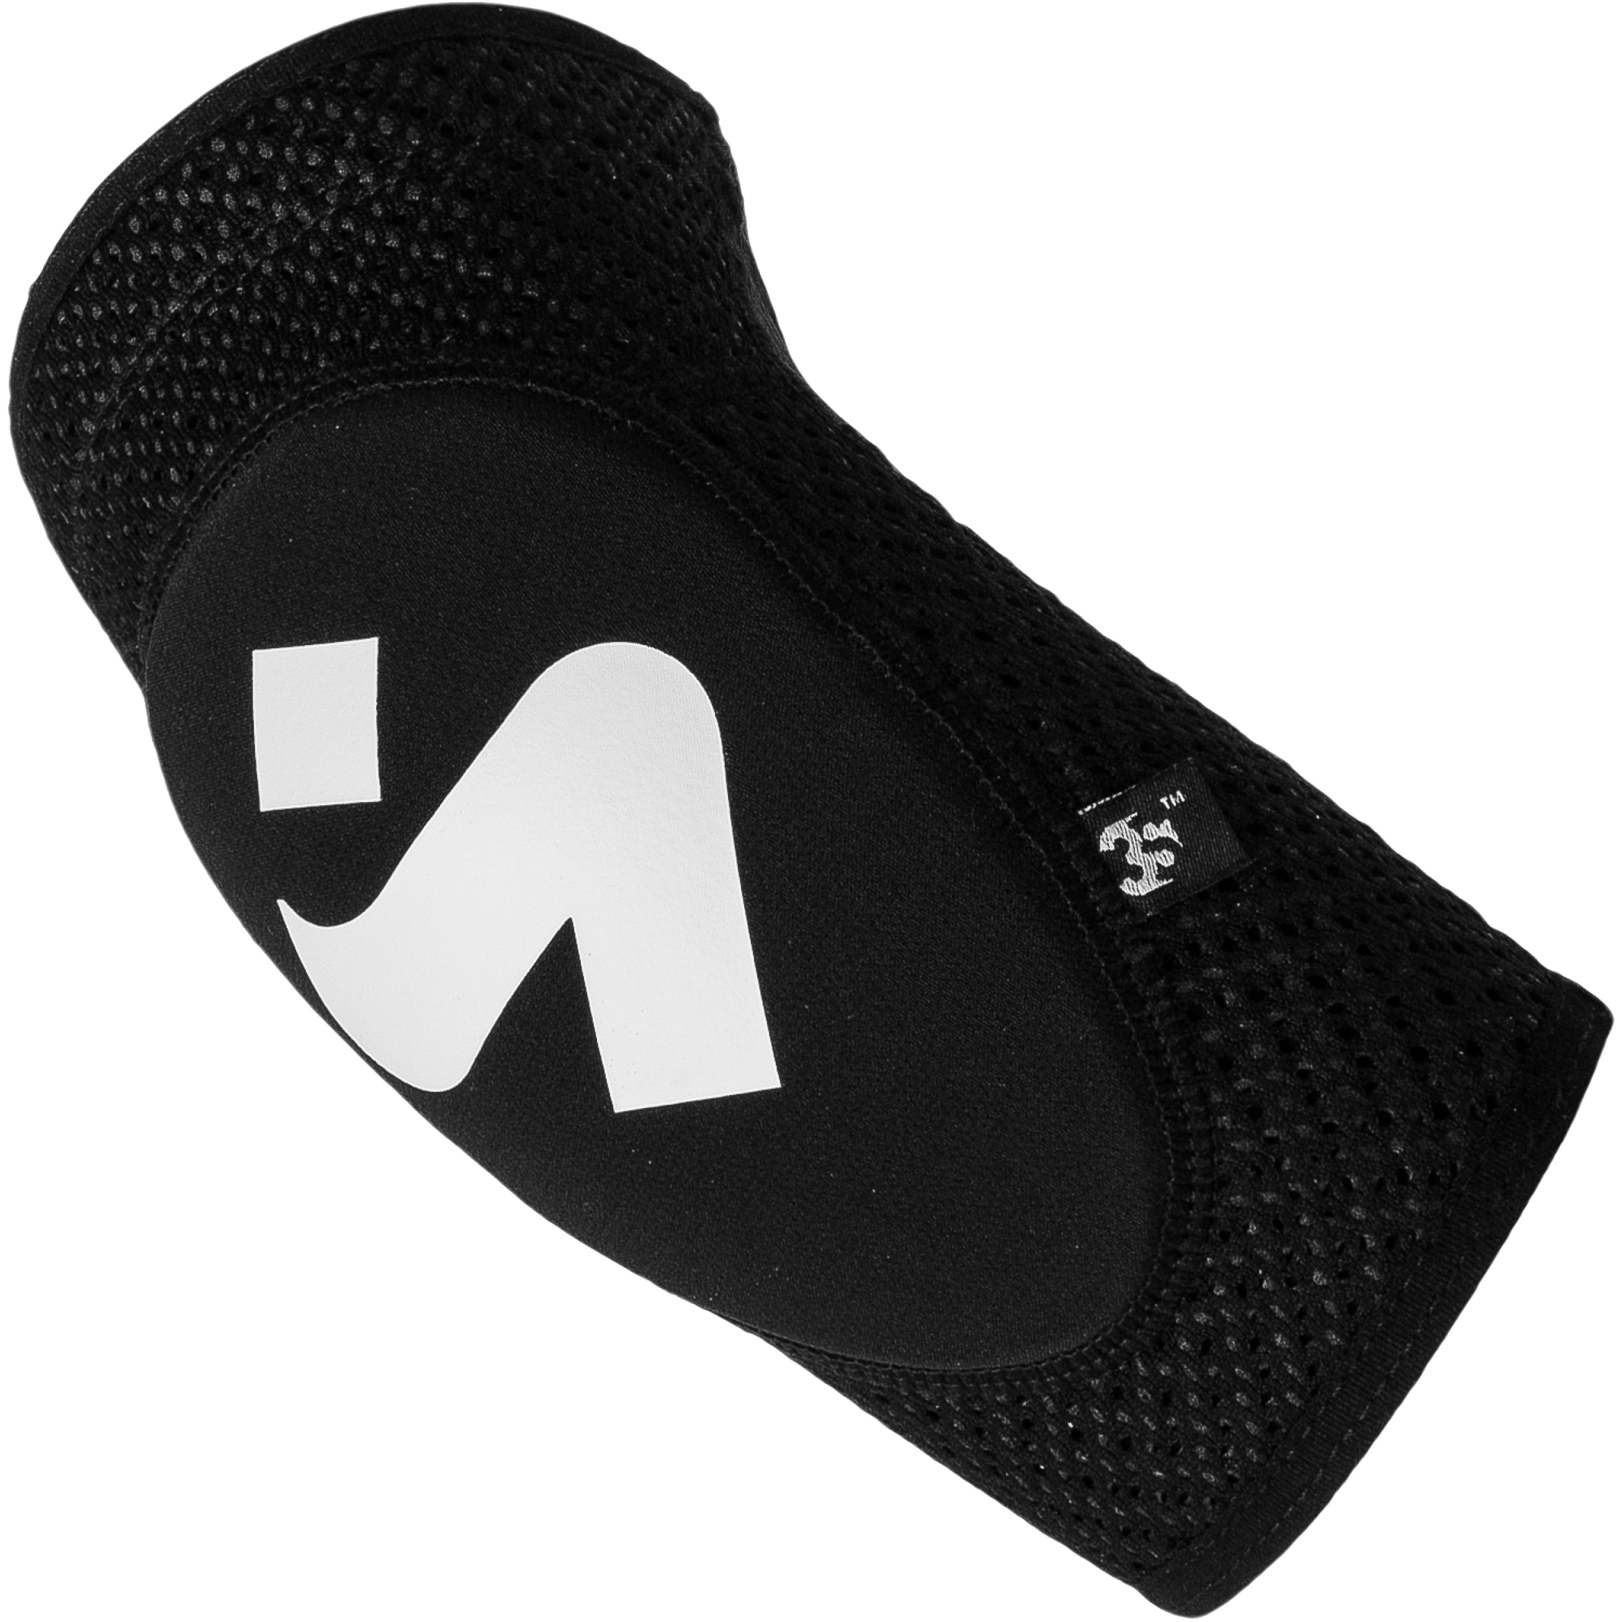 Picture of SWEET Protection Elbow Guards Light Junior - Black